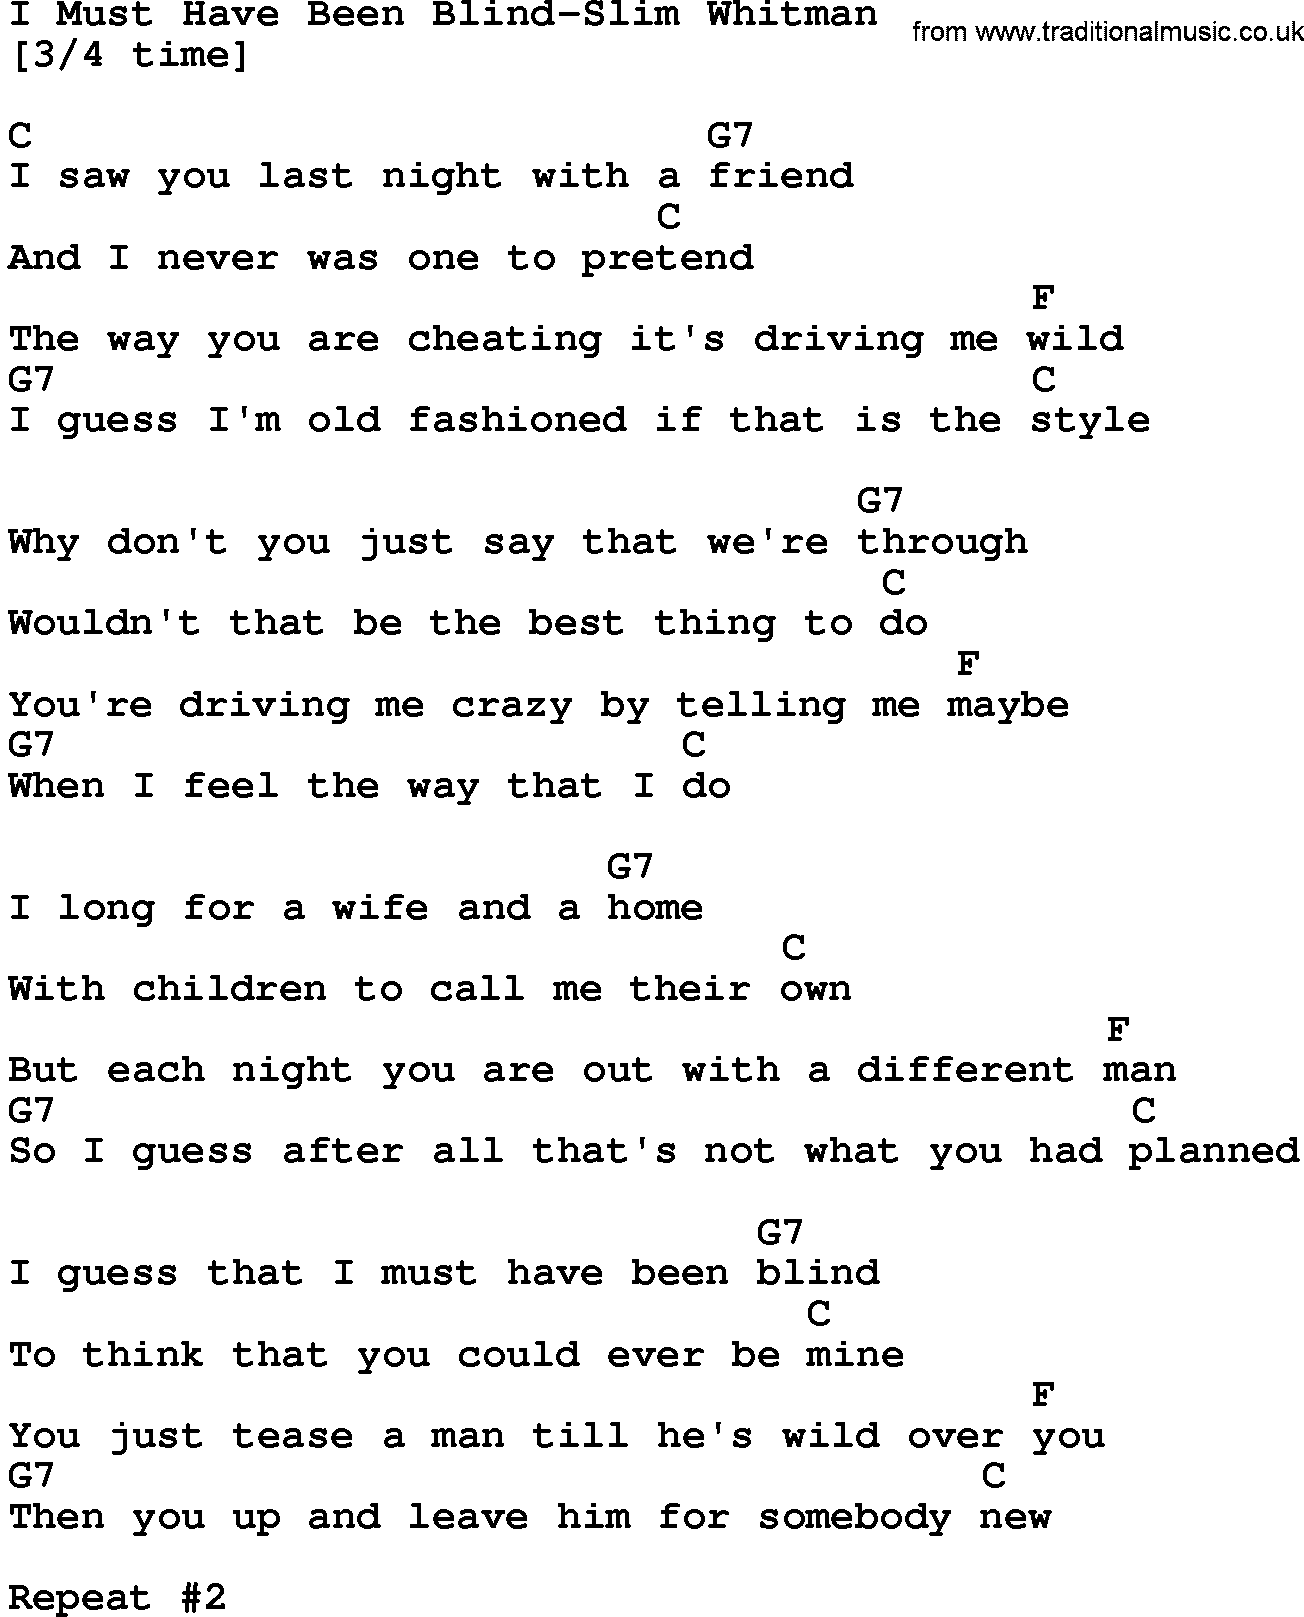 Country music song: I Must Have Been Blind-Slim Whitman lyrics and chords